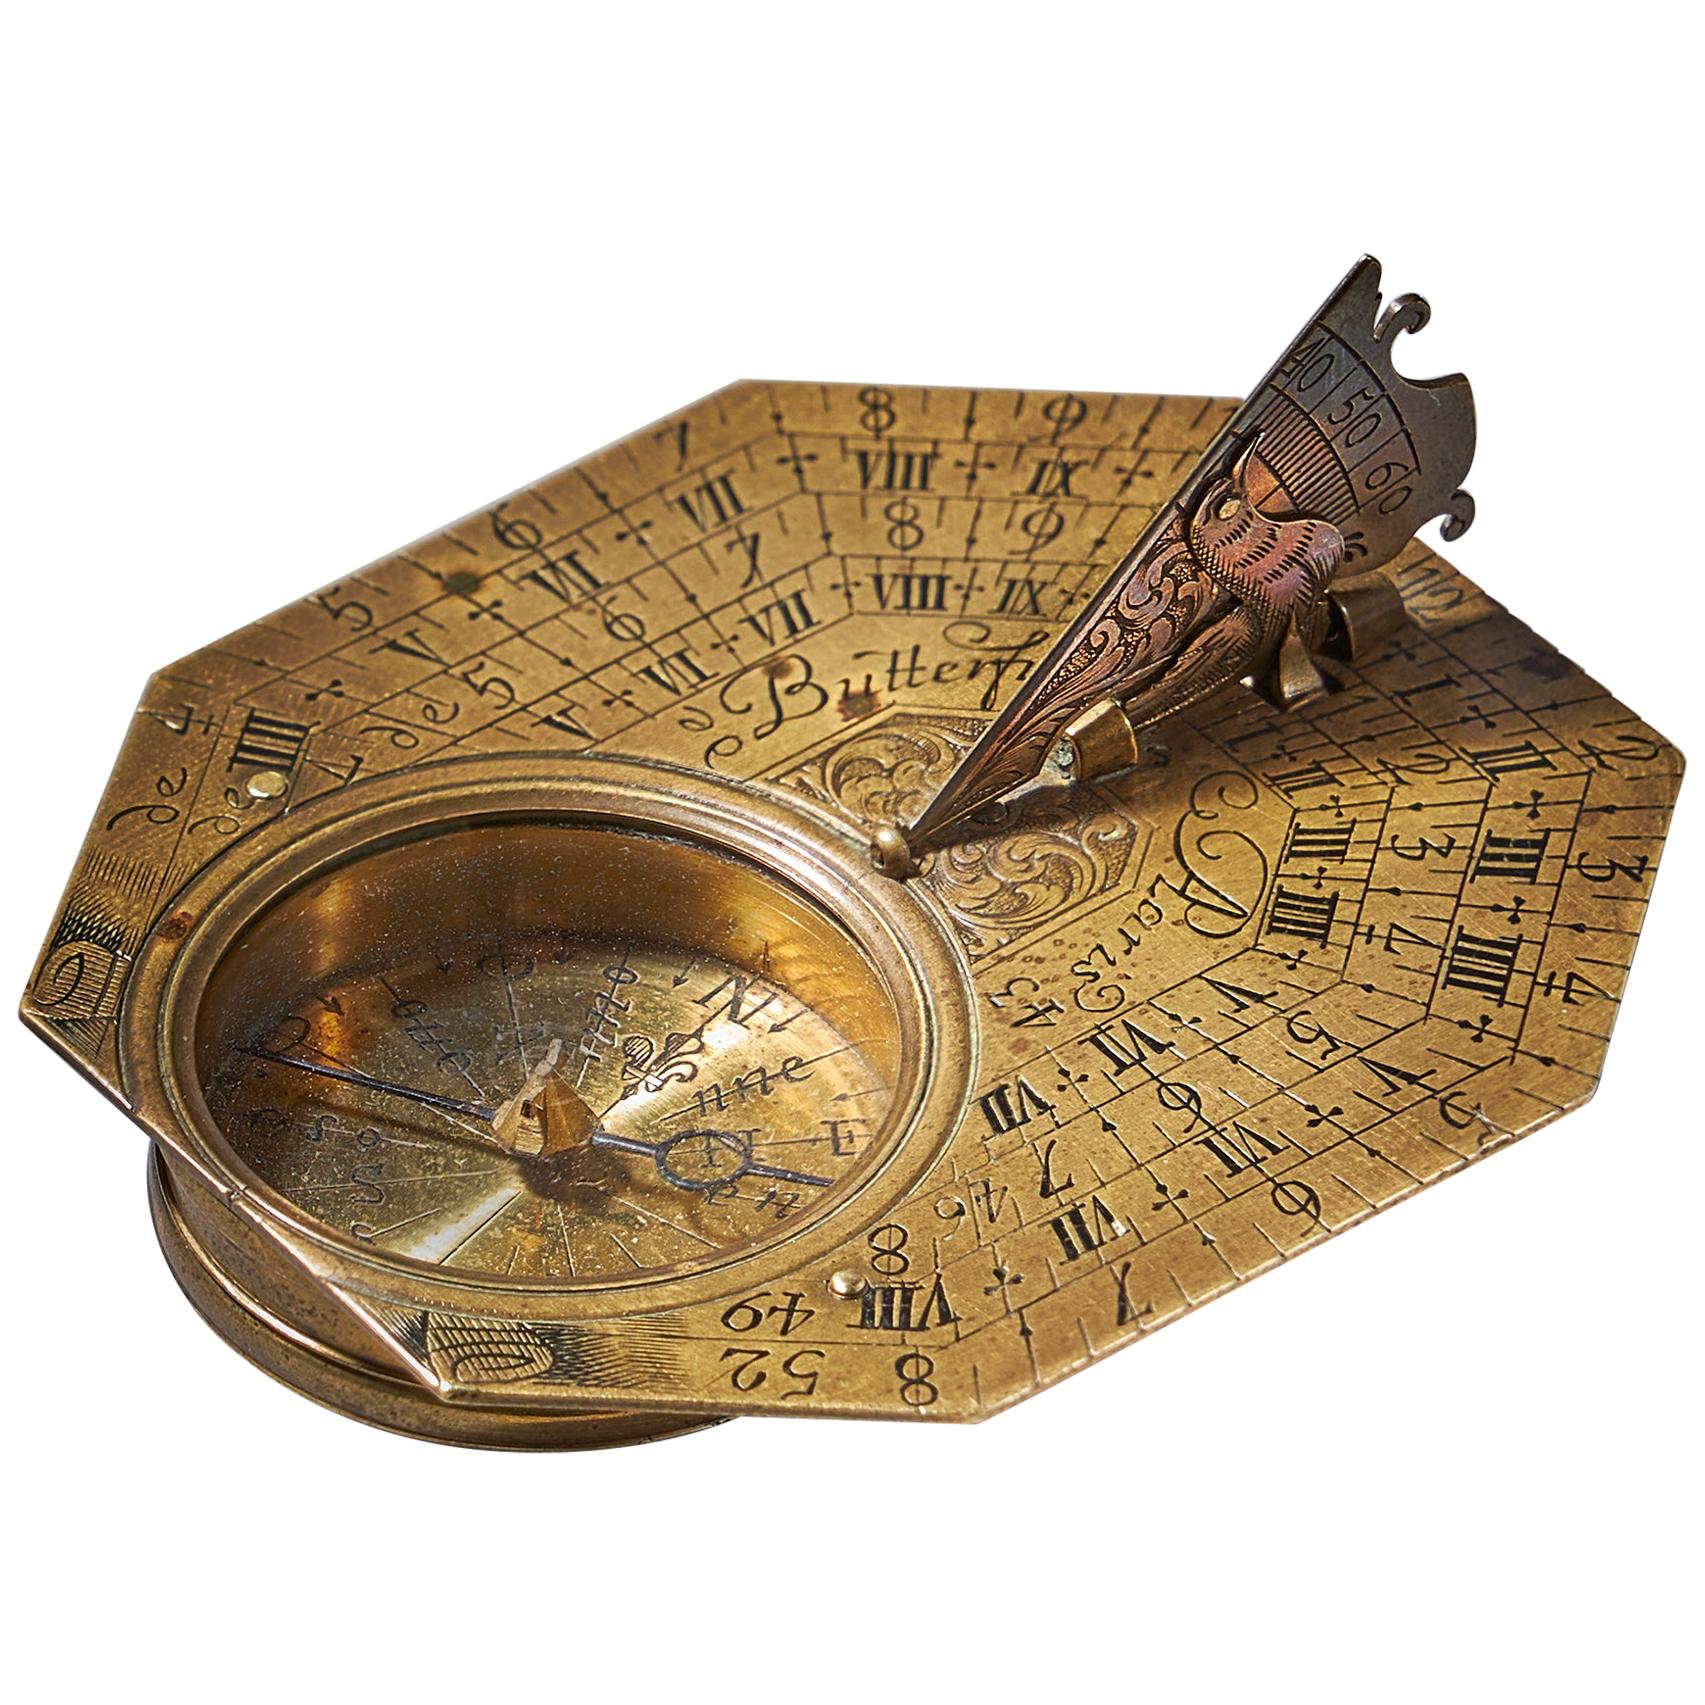 RBN ANTIQUITY Store Sundial Compass 5 inch Pocket Sundial Front Opening Sundial Clock for Hiking Camping & Turing 